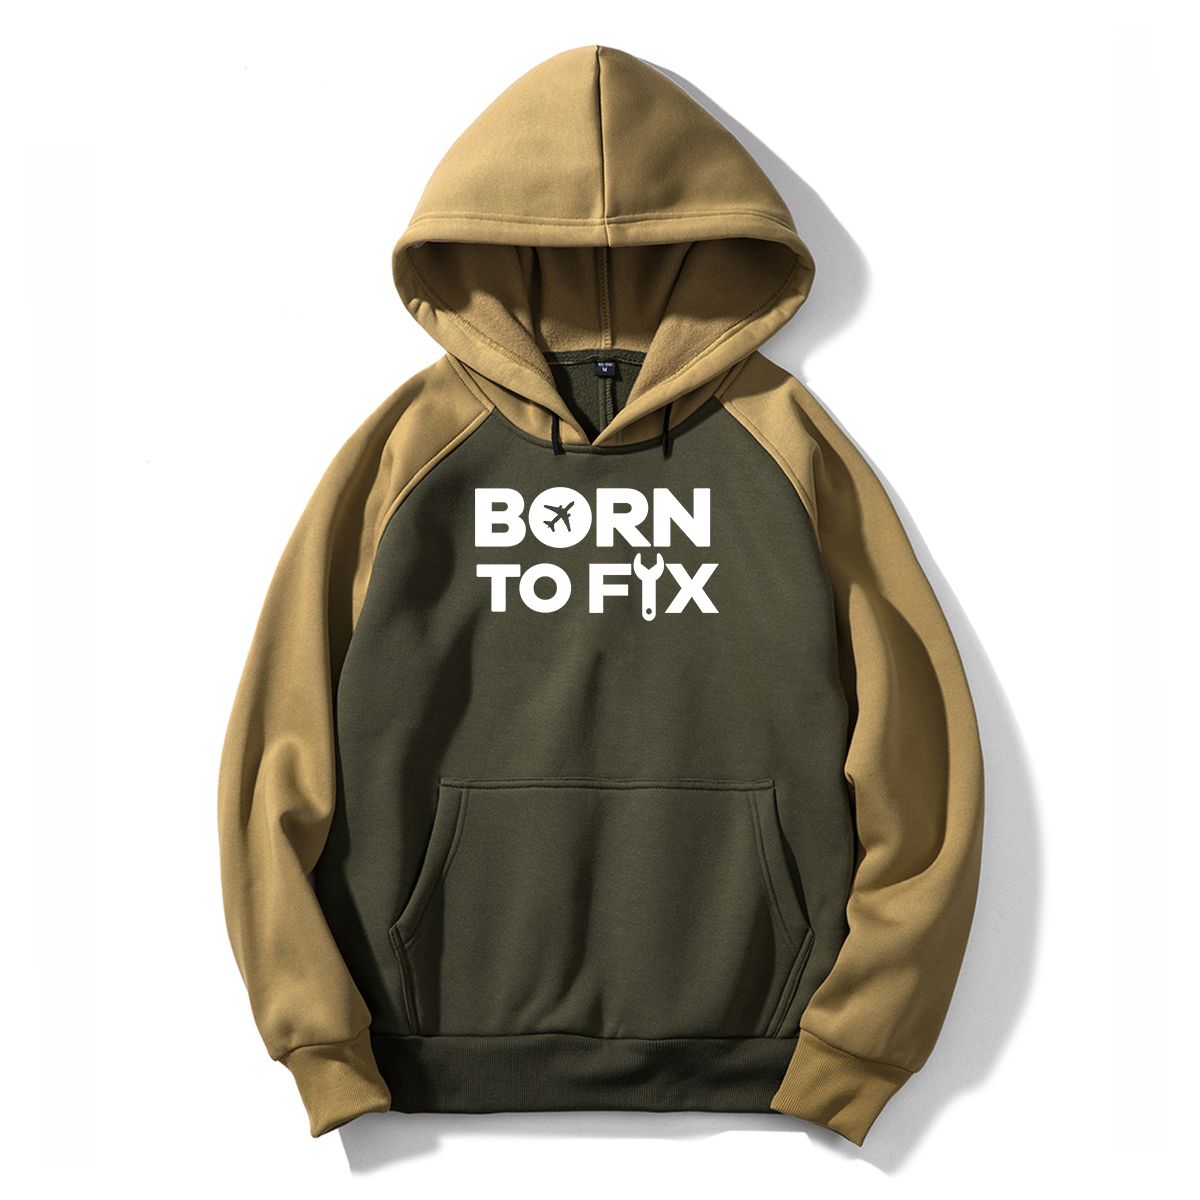 Born To Fix Airplanes Designed Colourful Hoodies